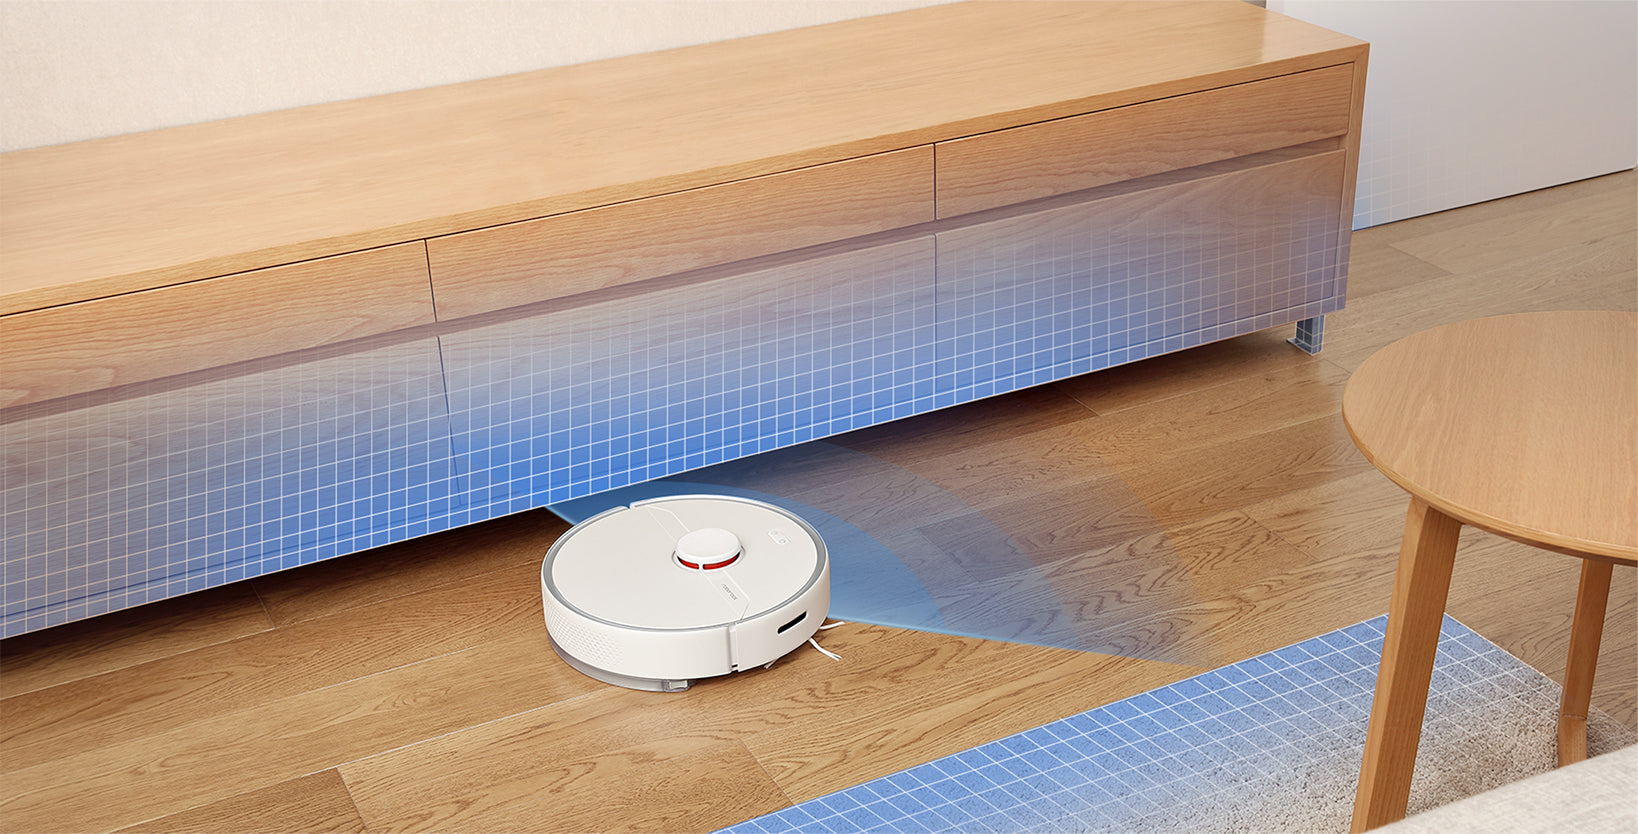  Roborock Renewed S6 Pure Robot Vacuum and Mop, Multi-Floor  Mapping, Lidar Navigation, No-go Zones, Selective Room Cleaning, Super  Strong Suction, Wi-Fi Connected, Alexa Voice Control (Renewed)